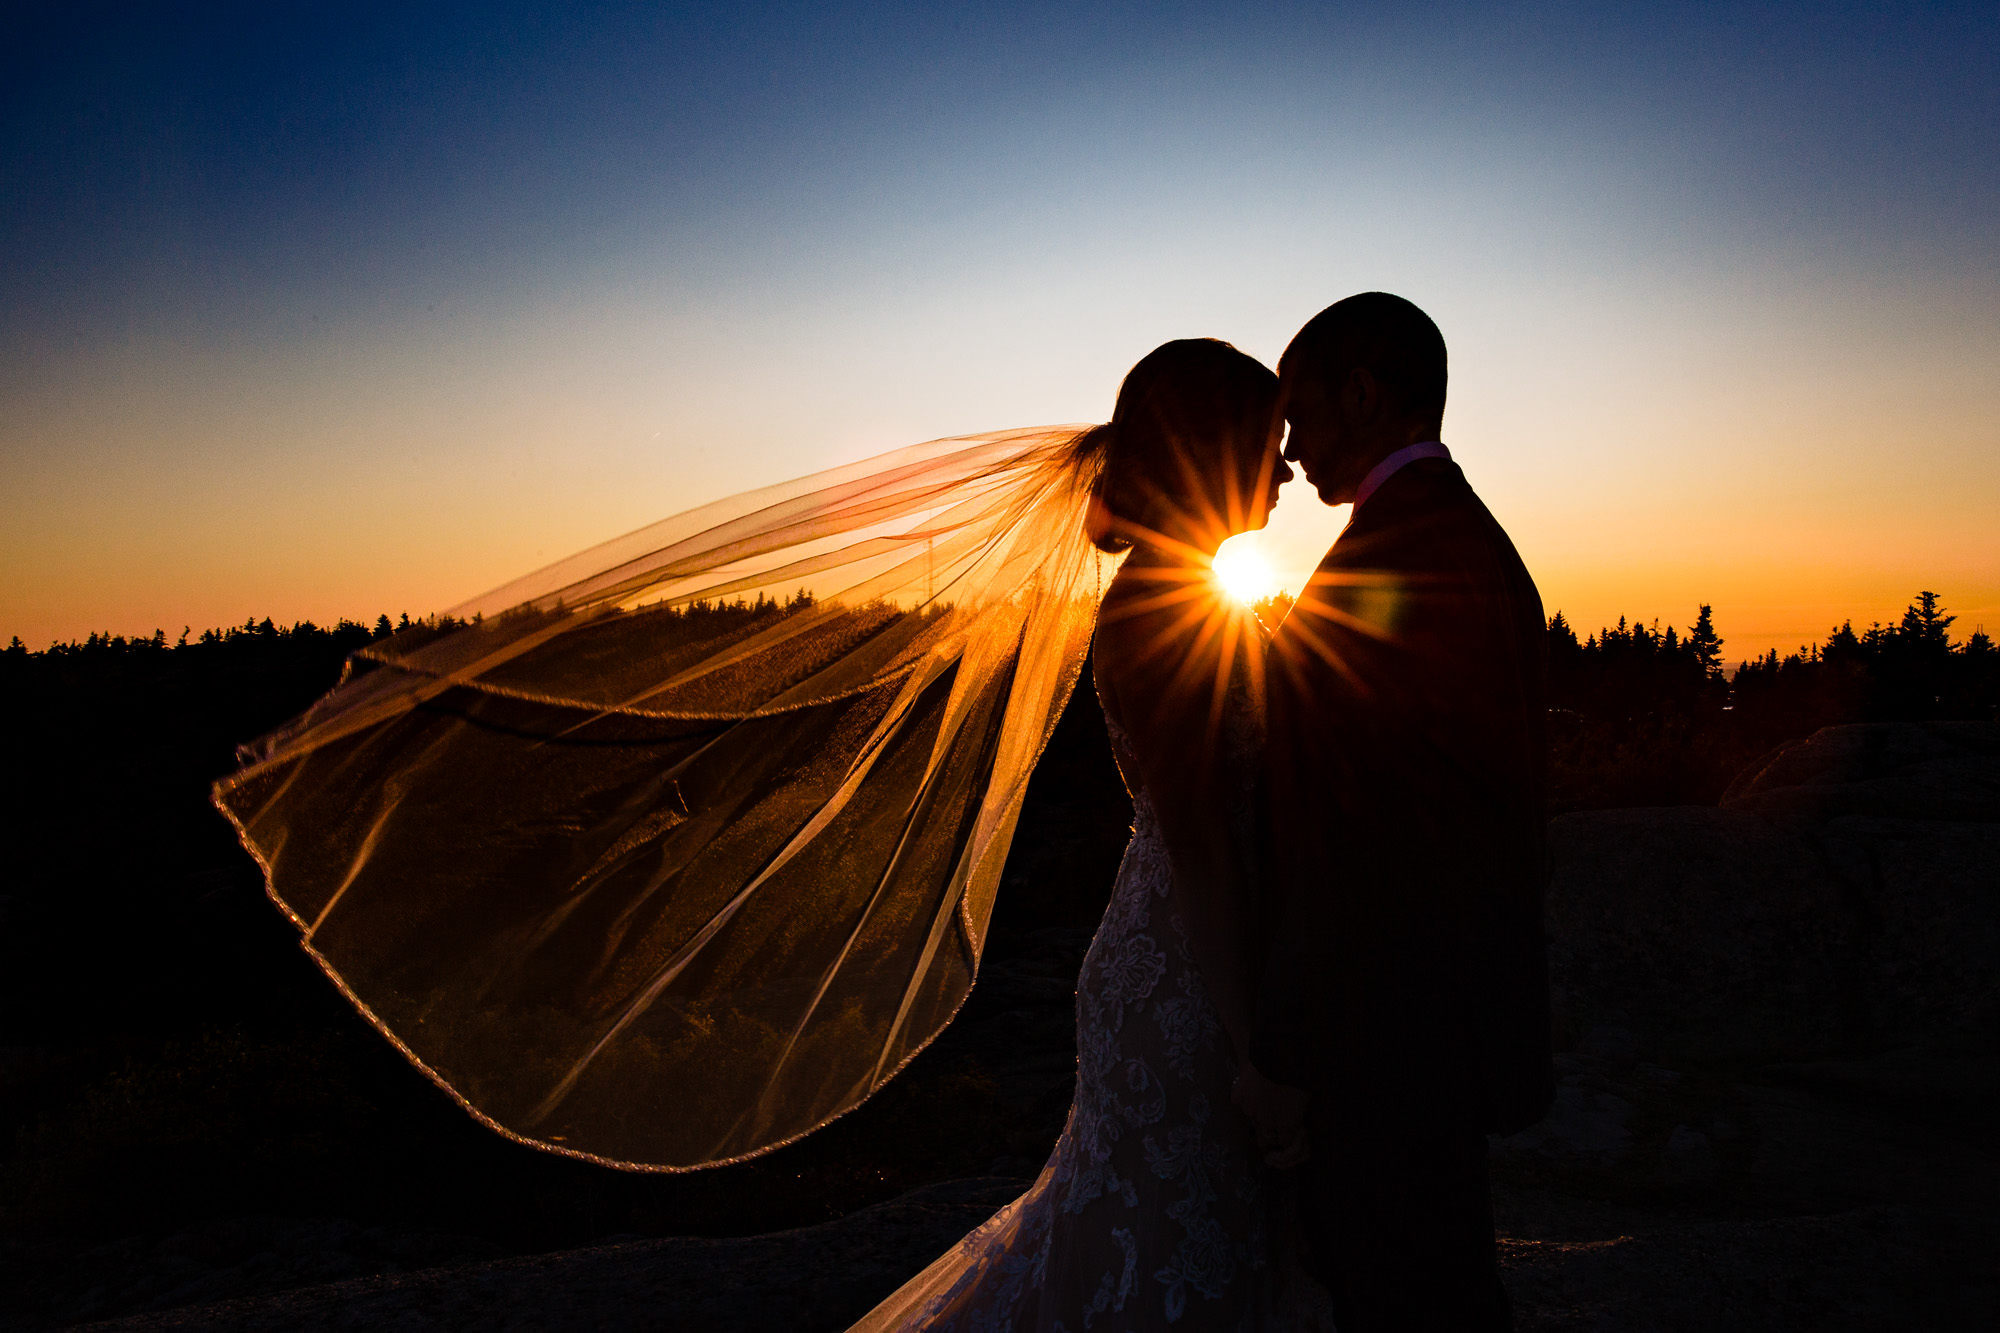 Sunset portraits taken at an elopement on Cadillac Mountain in Acadia National Park